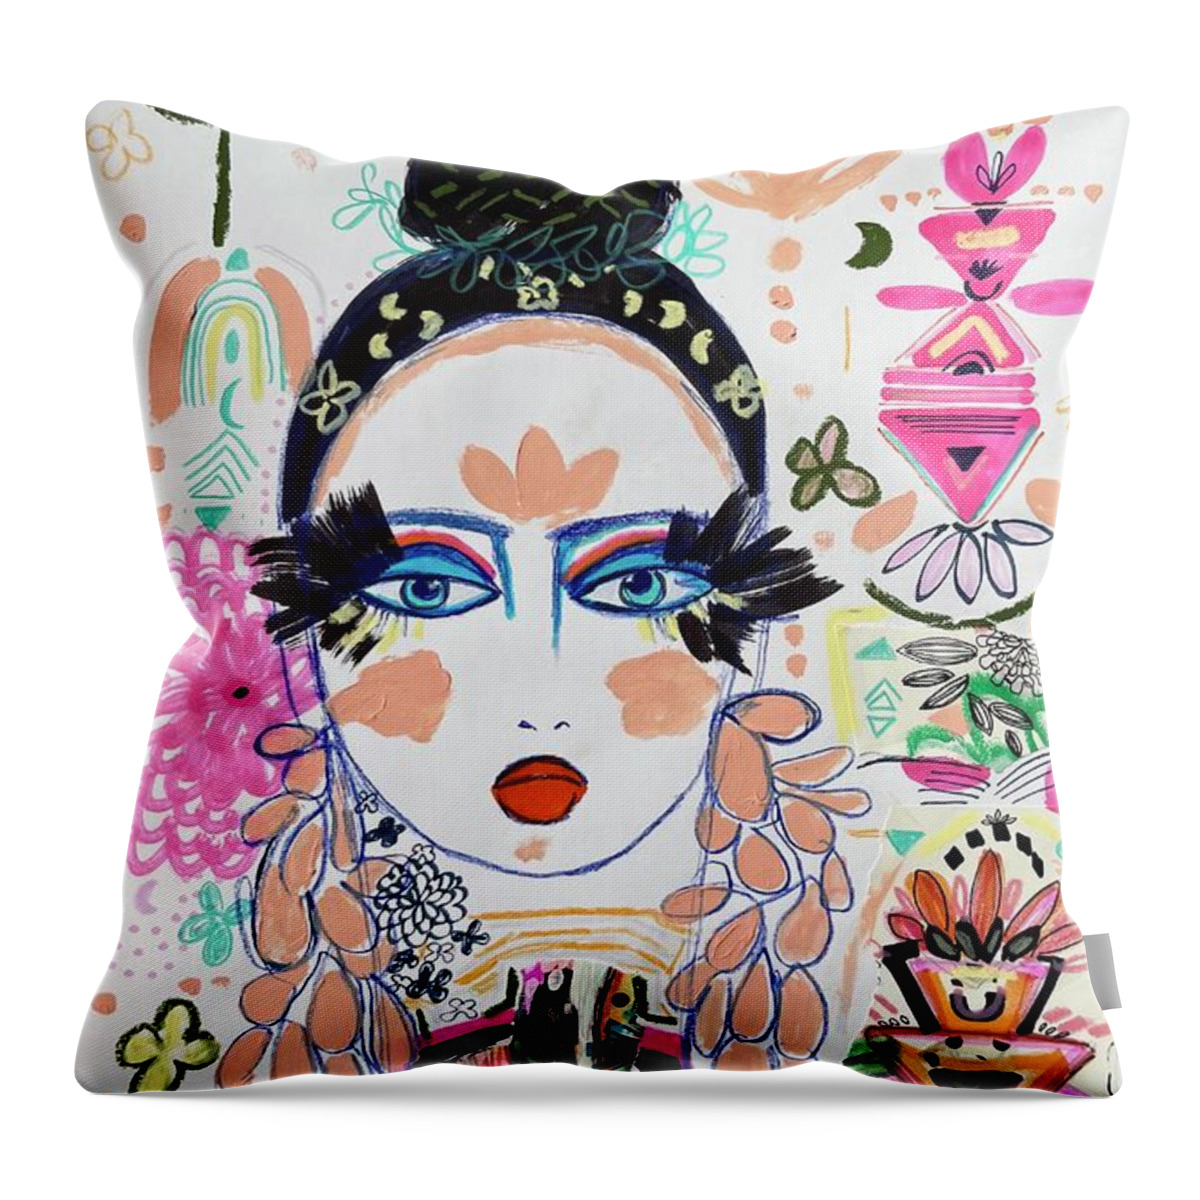 Abstract Face Art Throw Pillow featuring the mixed media Fashion Girl in Pink by Rosalina Bojadschijew